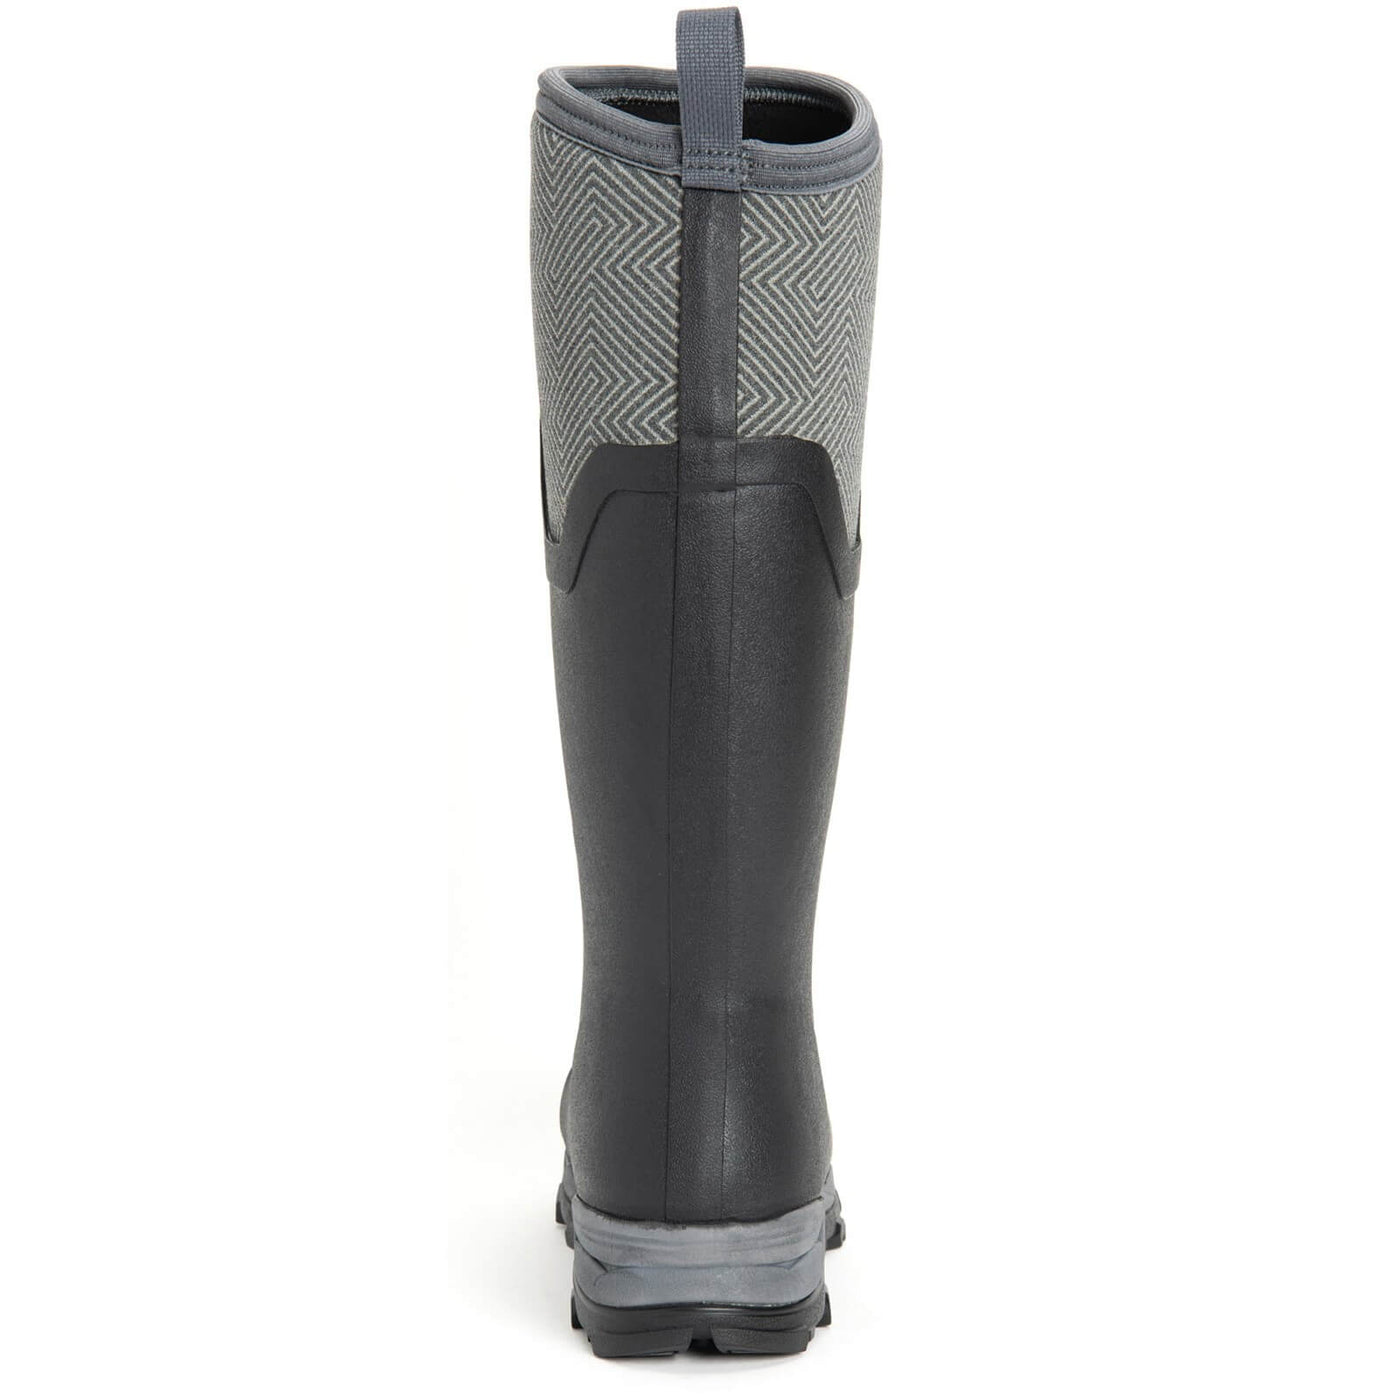 Muck Boots Arctic Ice Tall Wellington Boots Black/Grey Geometric 2#colour_black-grey-geometric